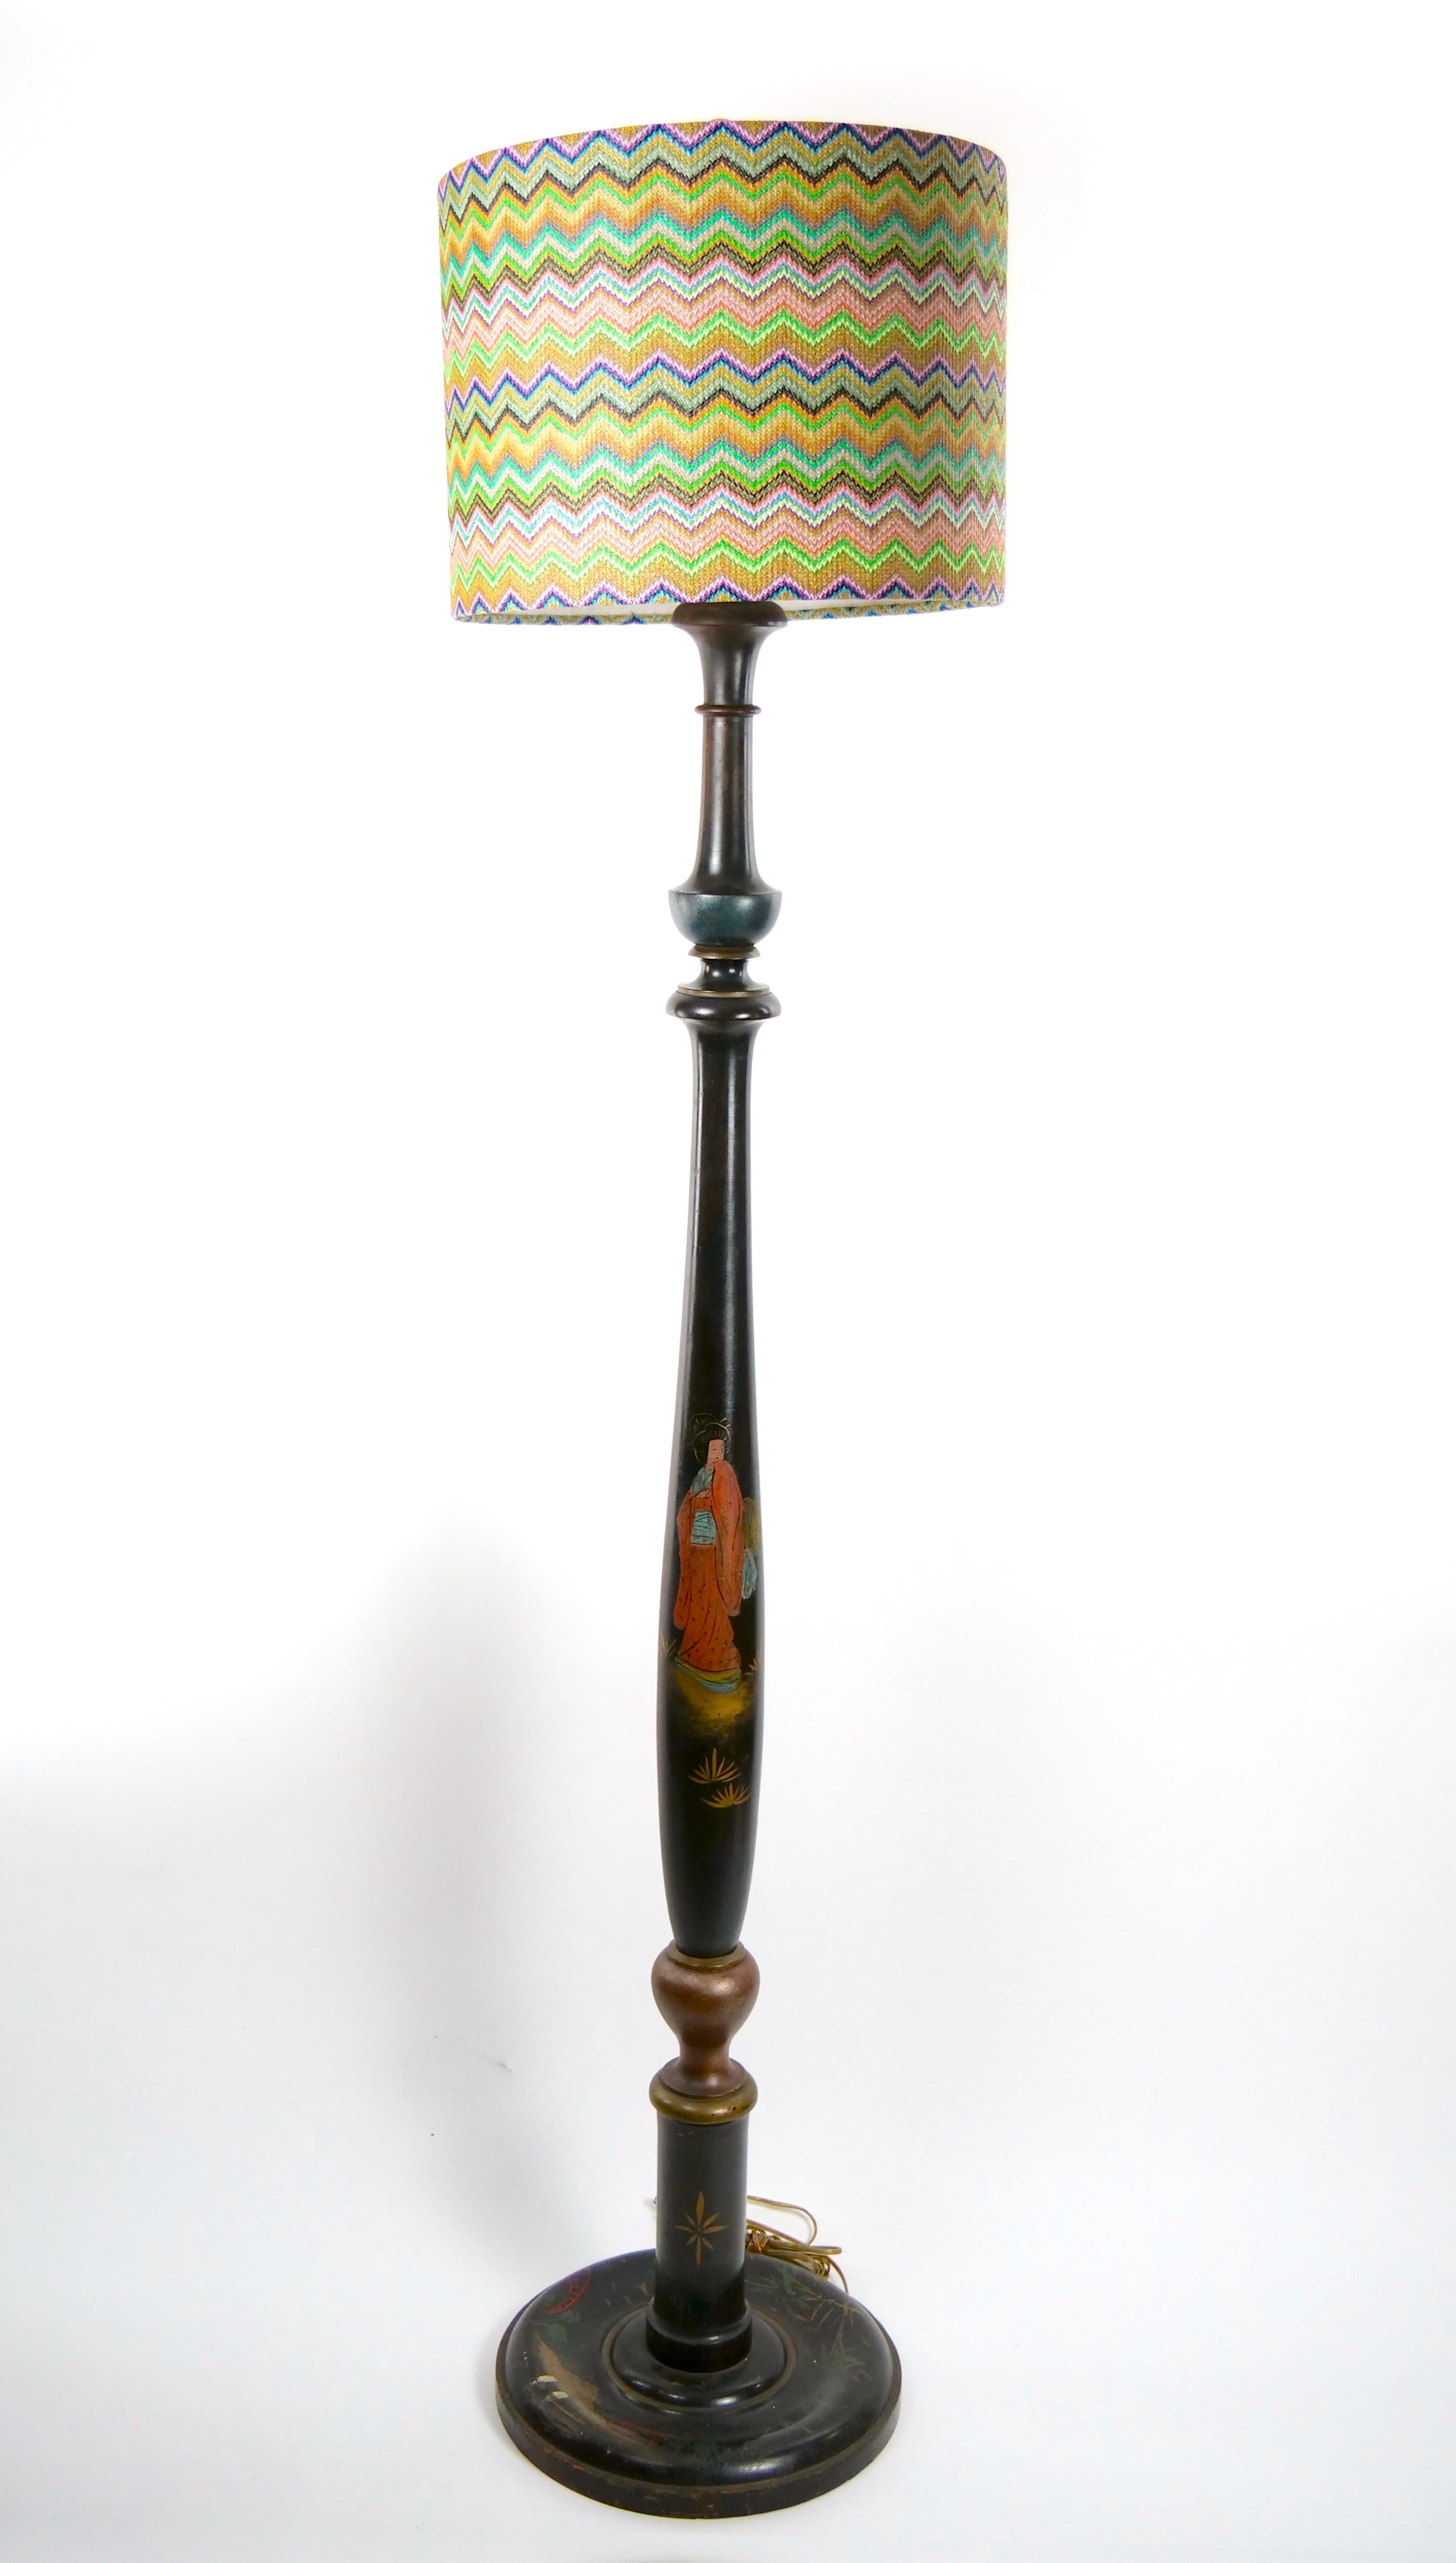 Illuminate your space with this Antique Turned Wooden Floor Lamp, a unique piece of lighting that marries functionality with artistic beauty. The lamp's circular base is adorned with hand-painted designs in the Japanese/Chinese style, transporting